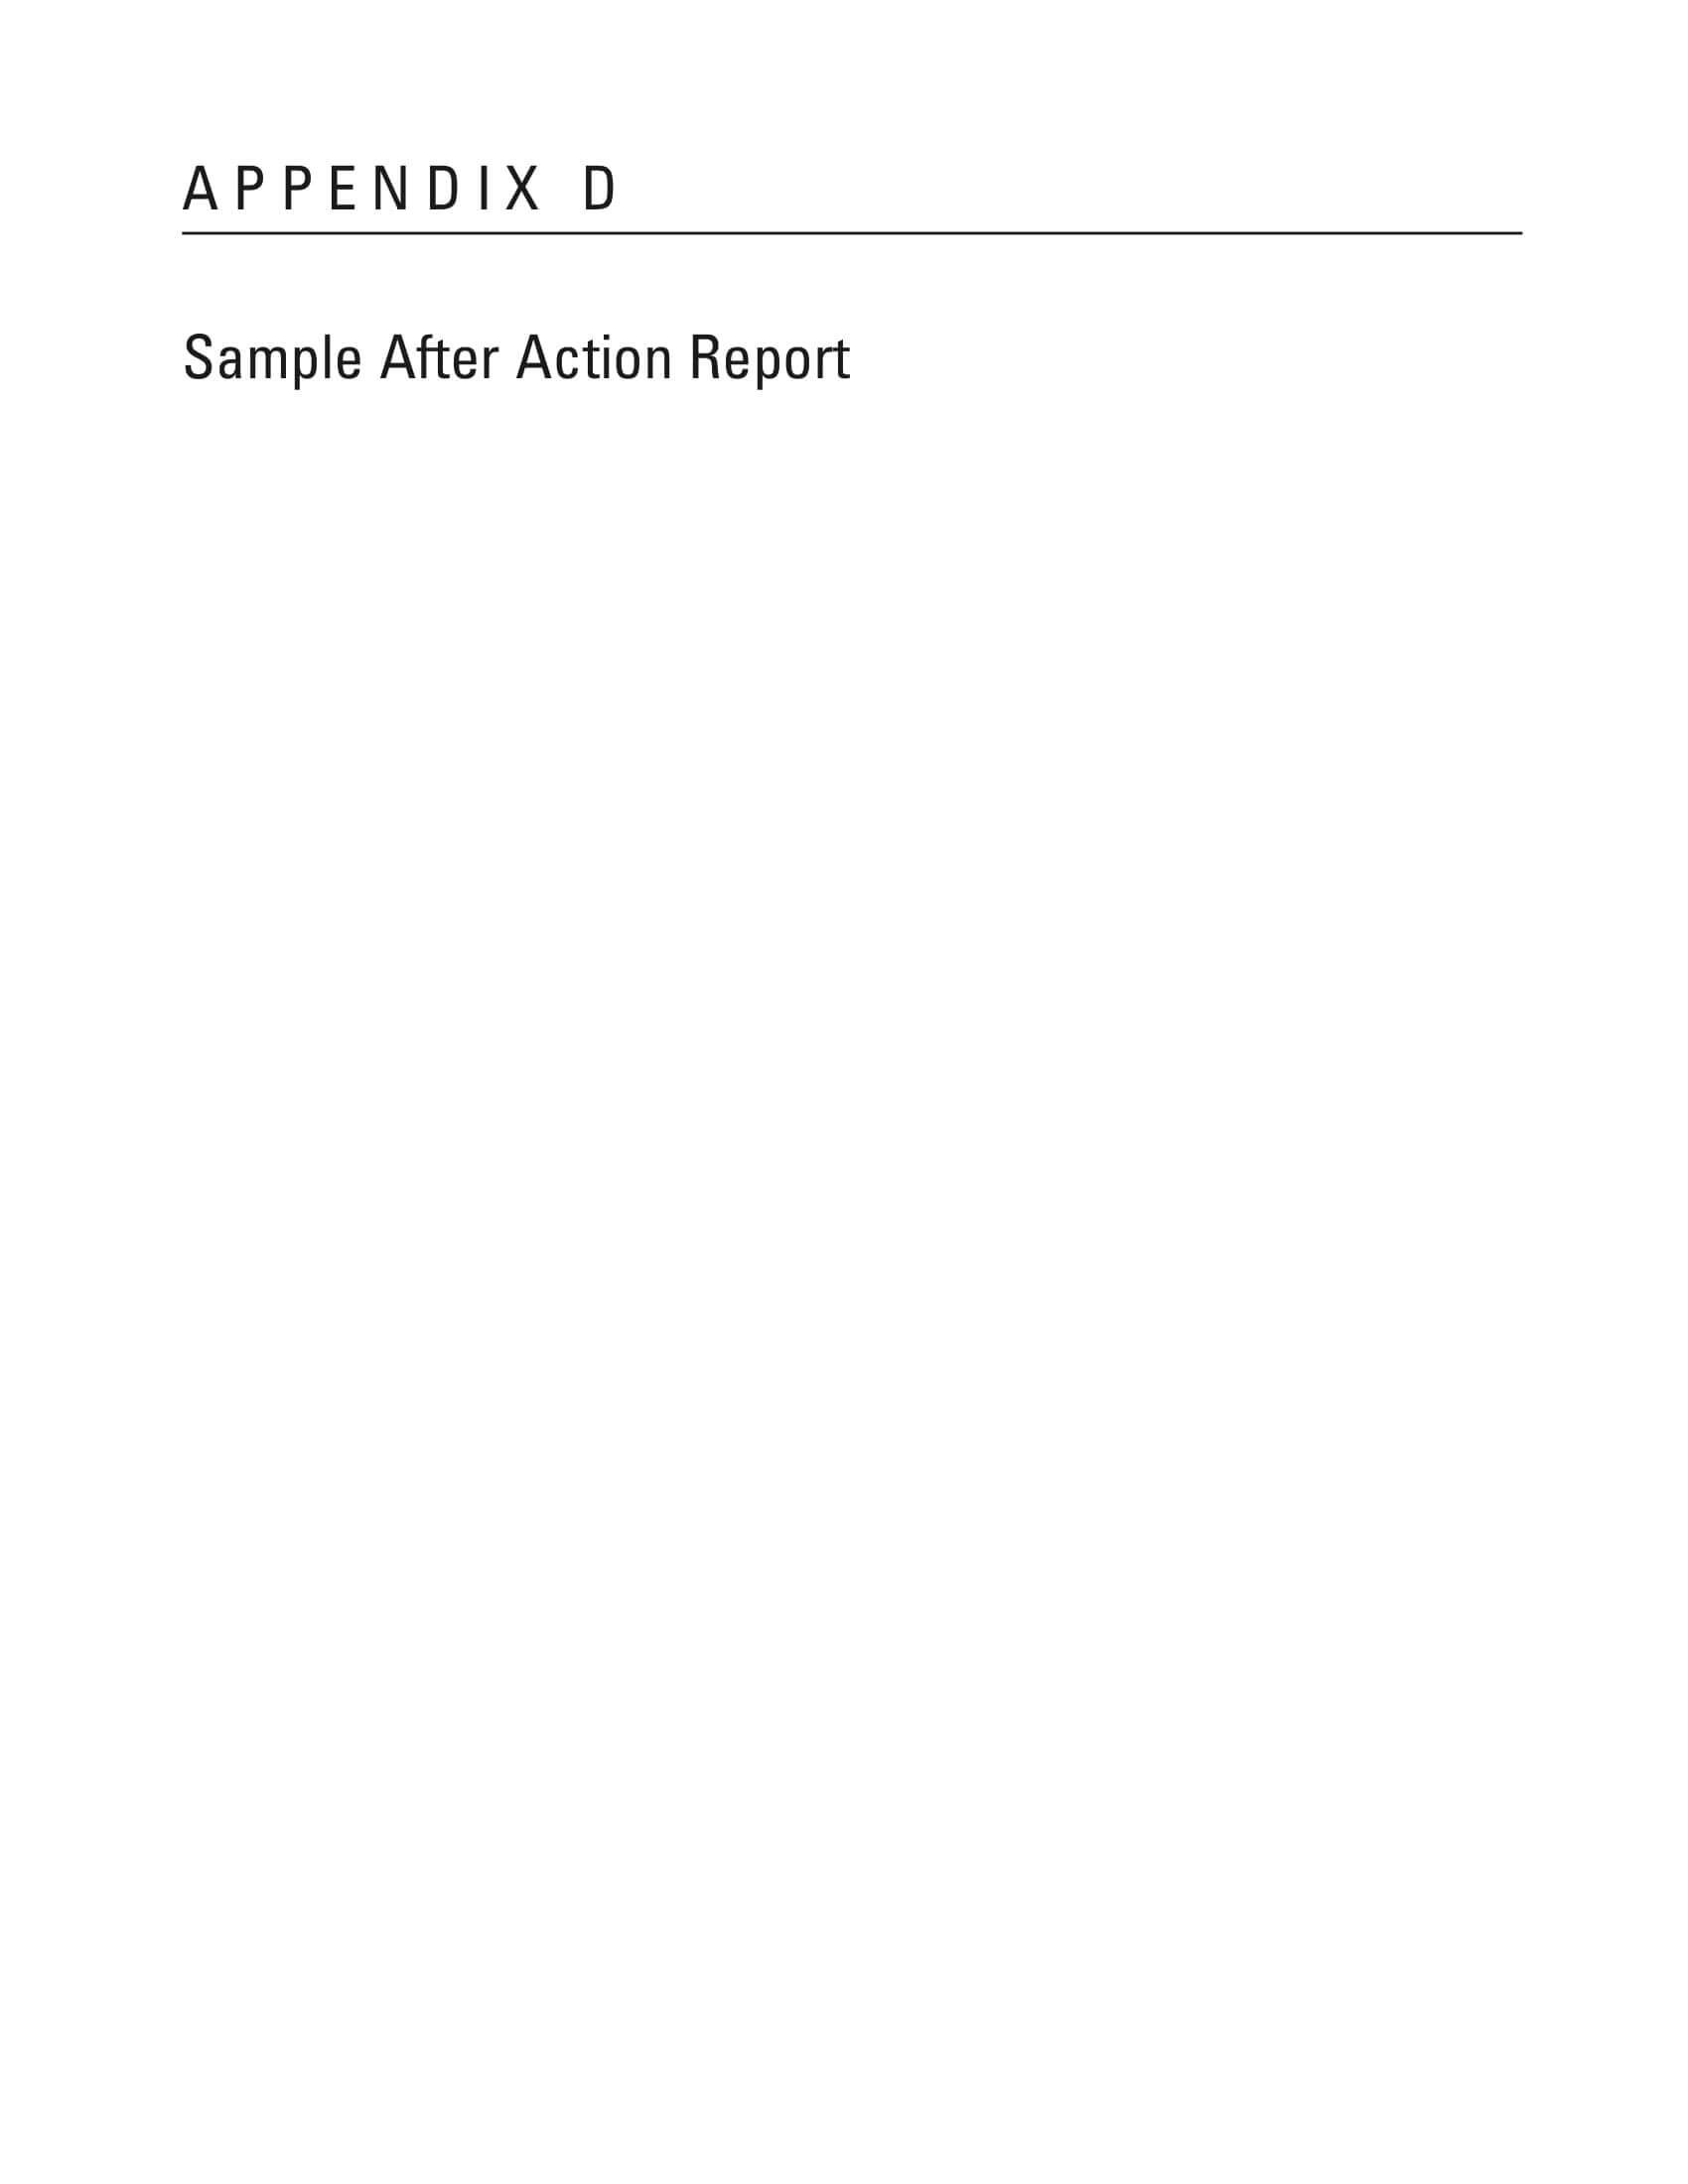 Rma Report Template Awesome Simple After Action Weekly Intended For Rma Report Template